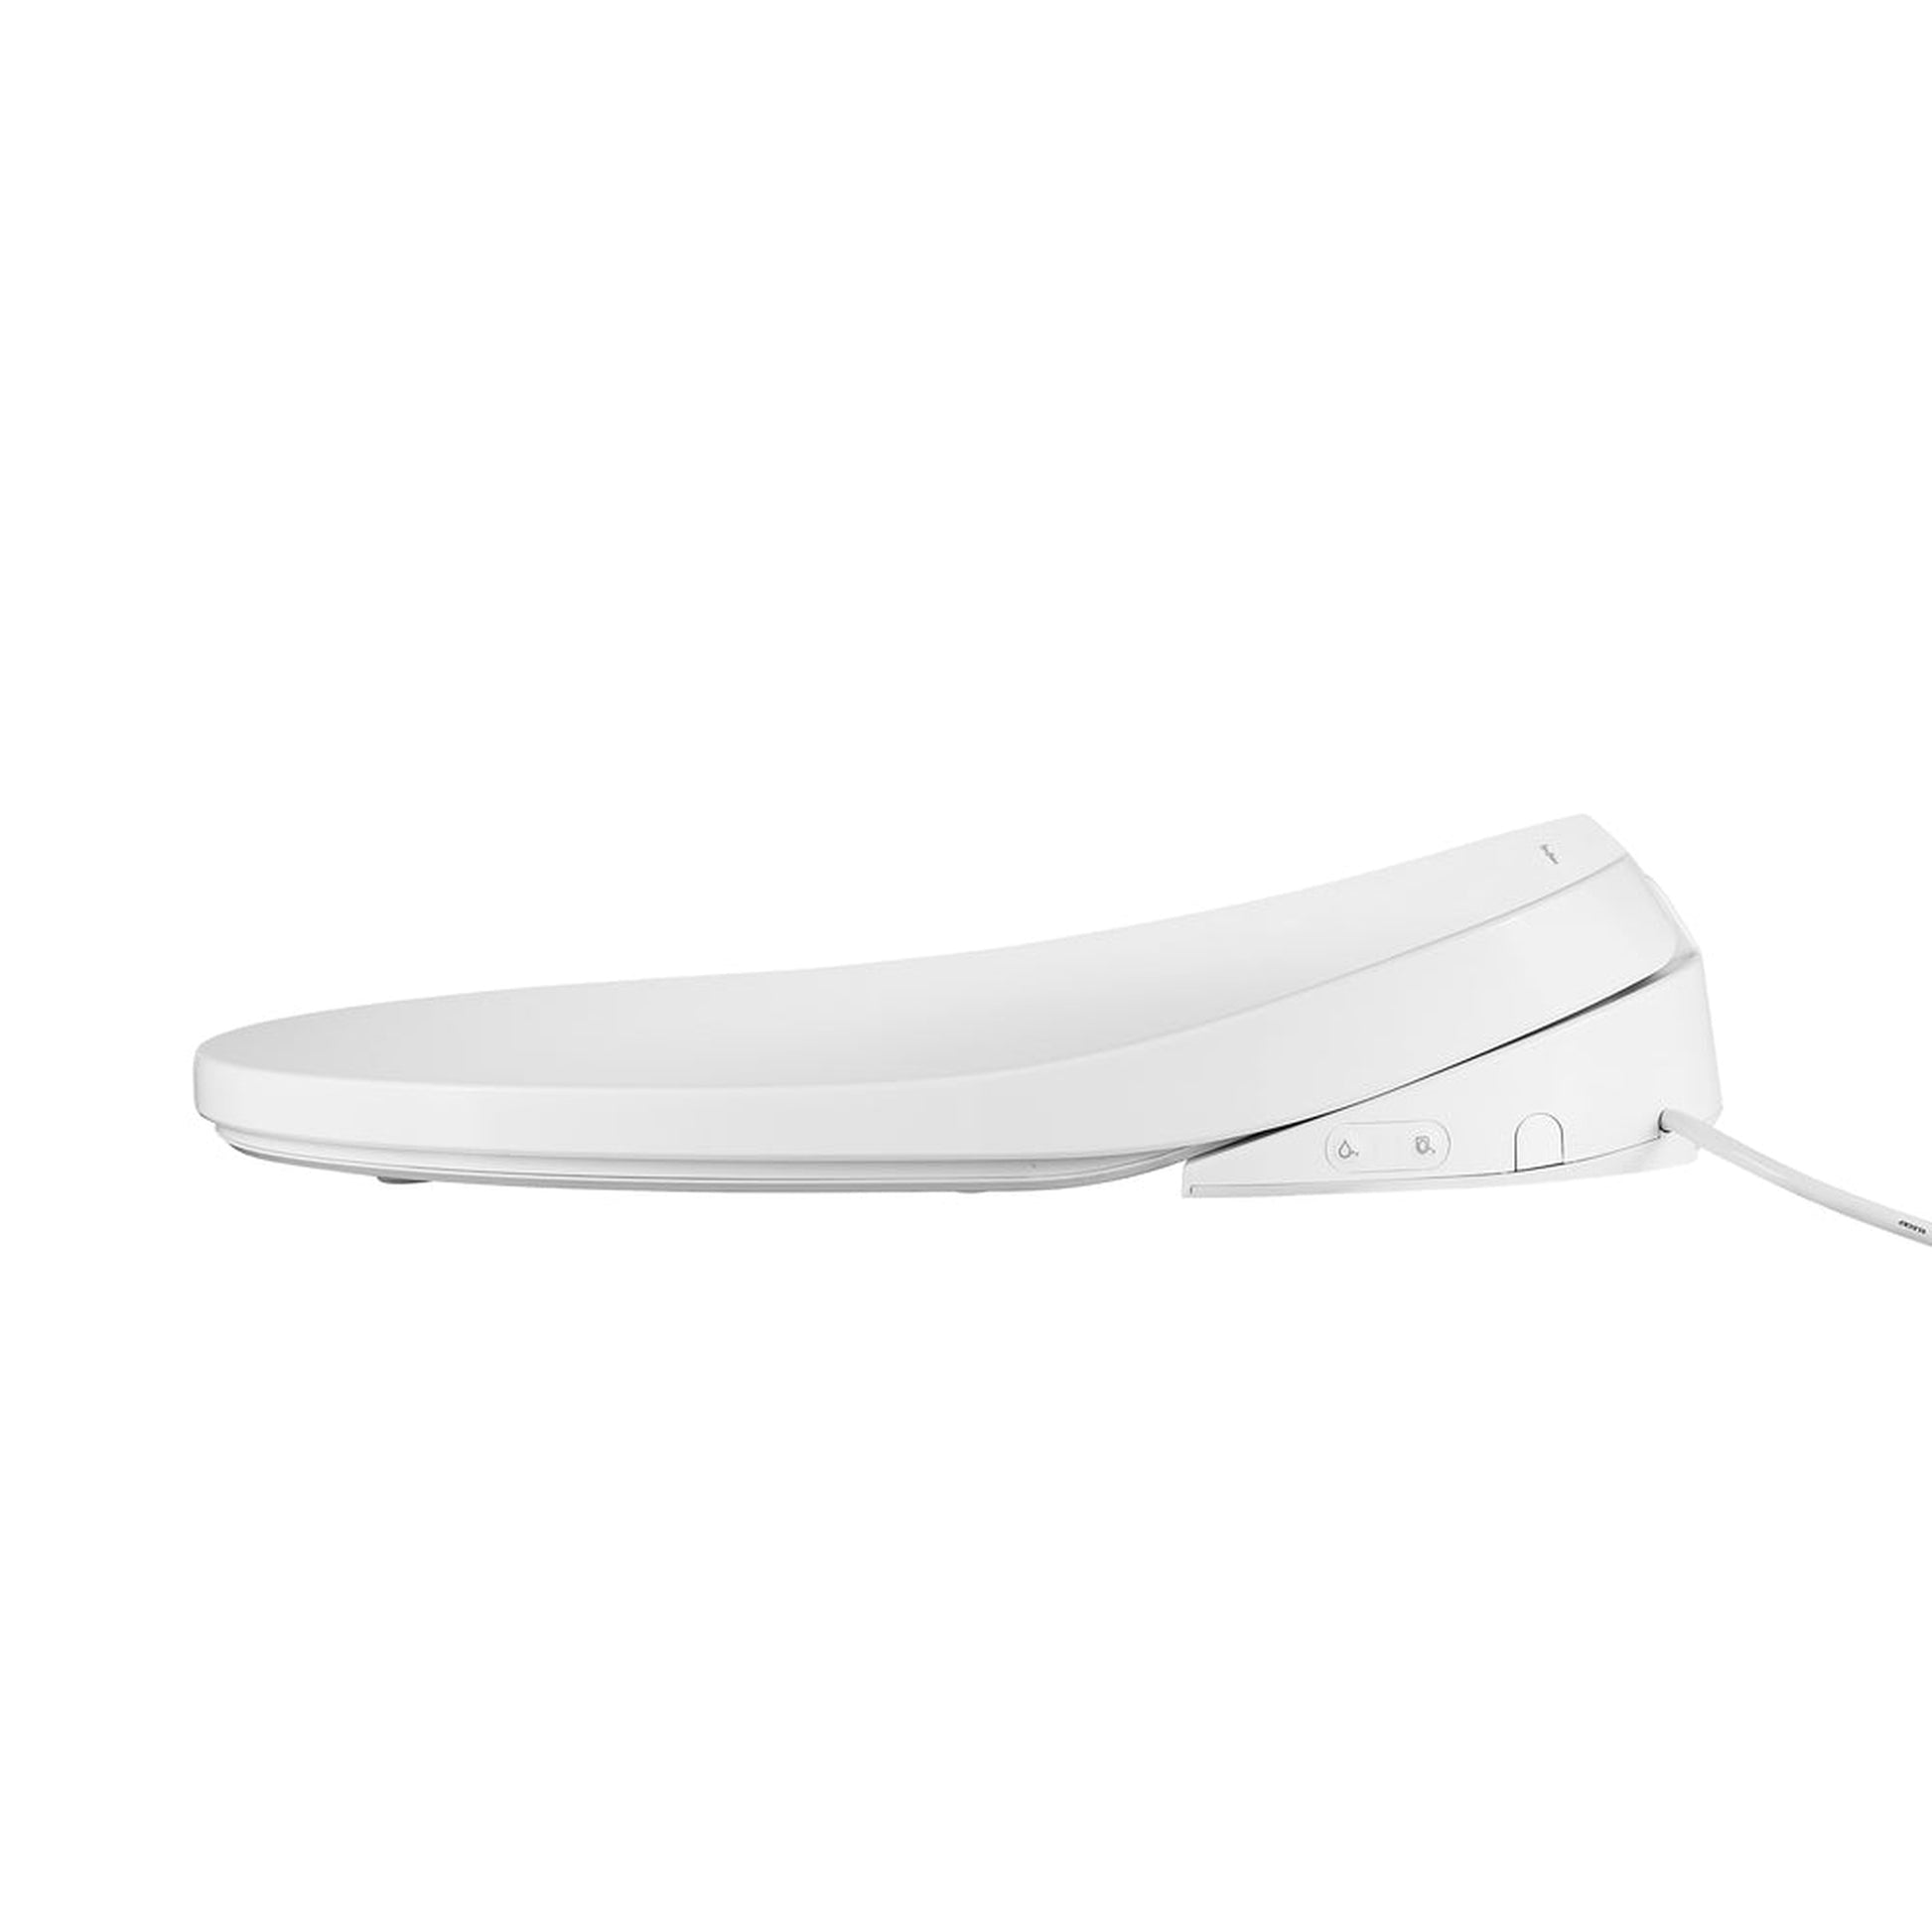 Swiss Madison Cascade 15" White Closed Front Elongated Smart Toilet Seat Bidet With Lid